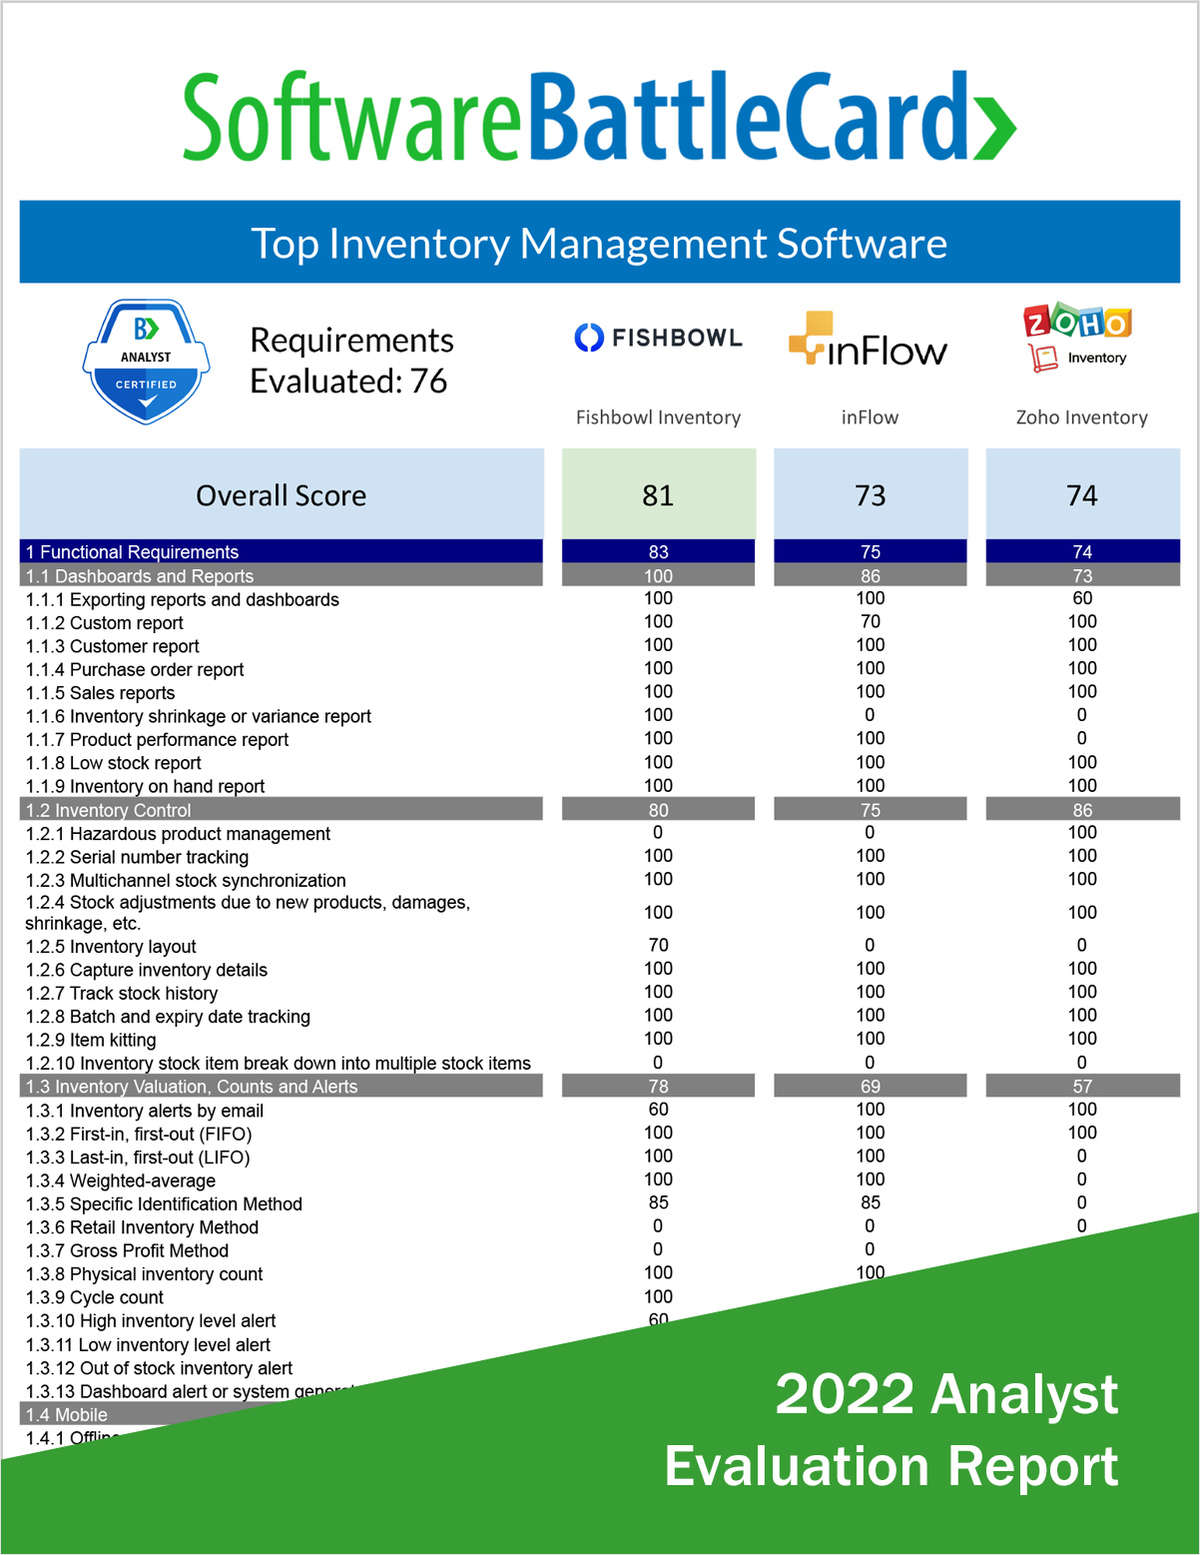 Top Inventory Management Software BattleCard--Fishbowl Inventory vs. inFlow vs. Zoho Inventory